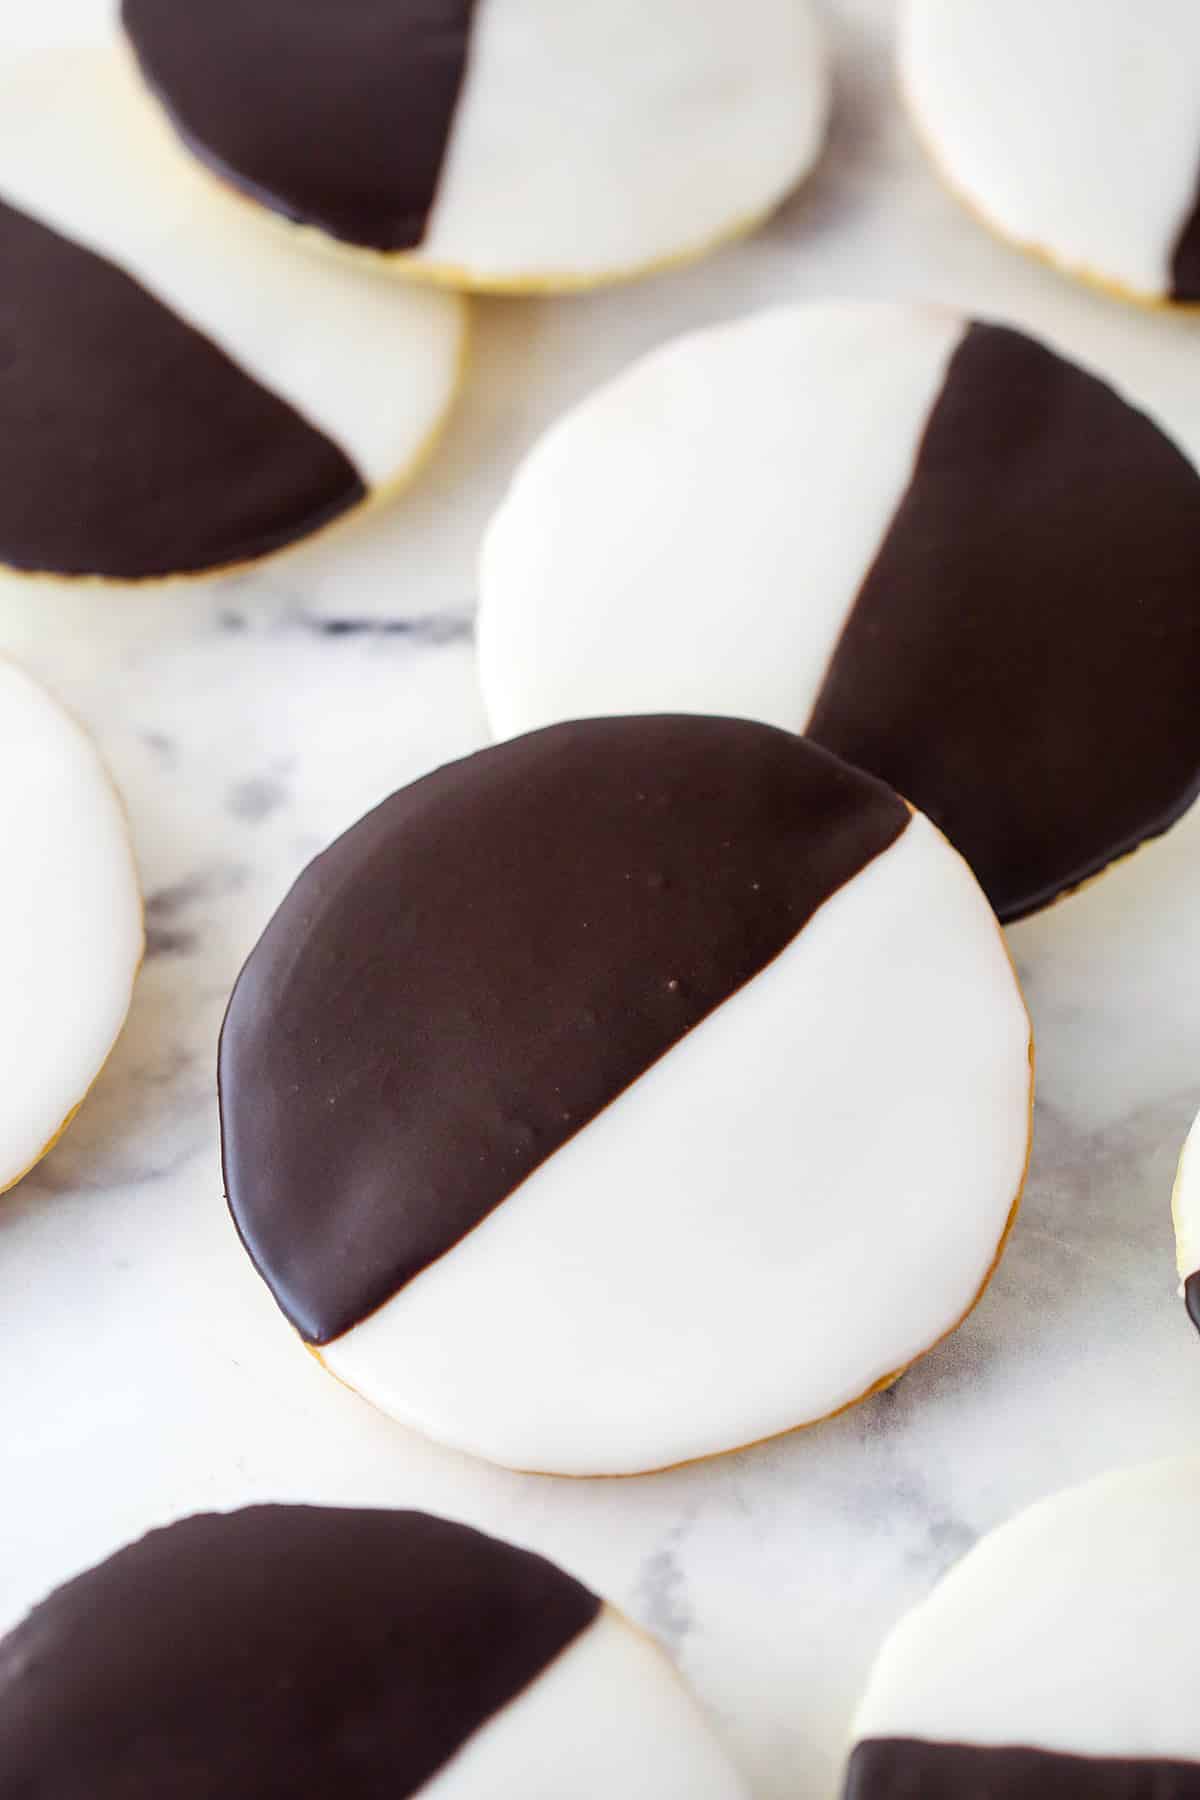 Overhead image of half moon cookies on a marble surface.